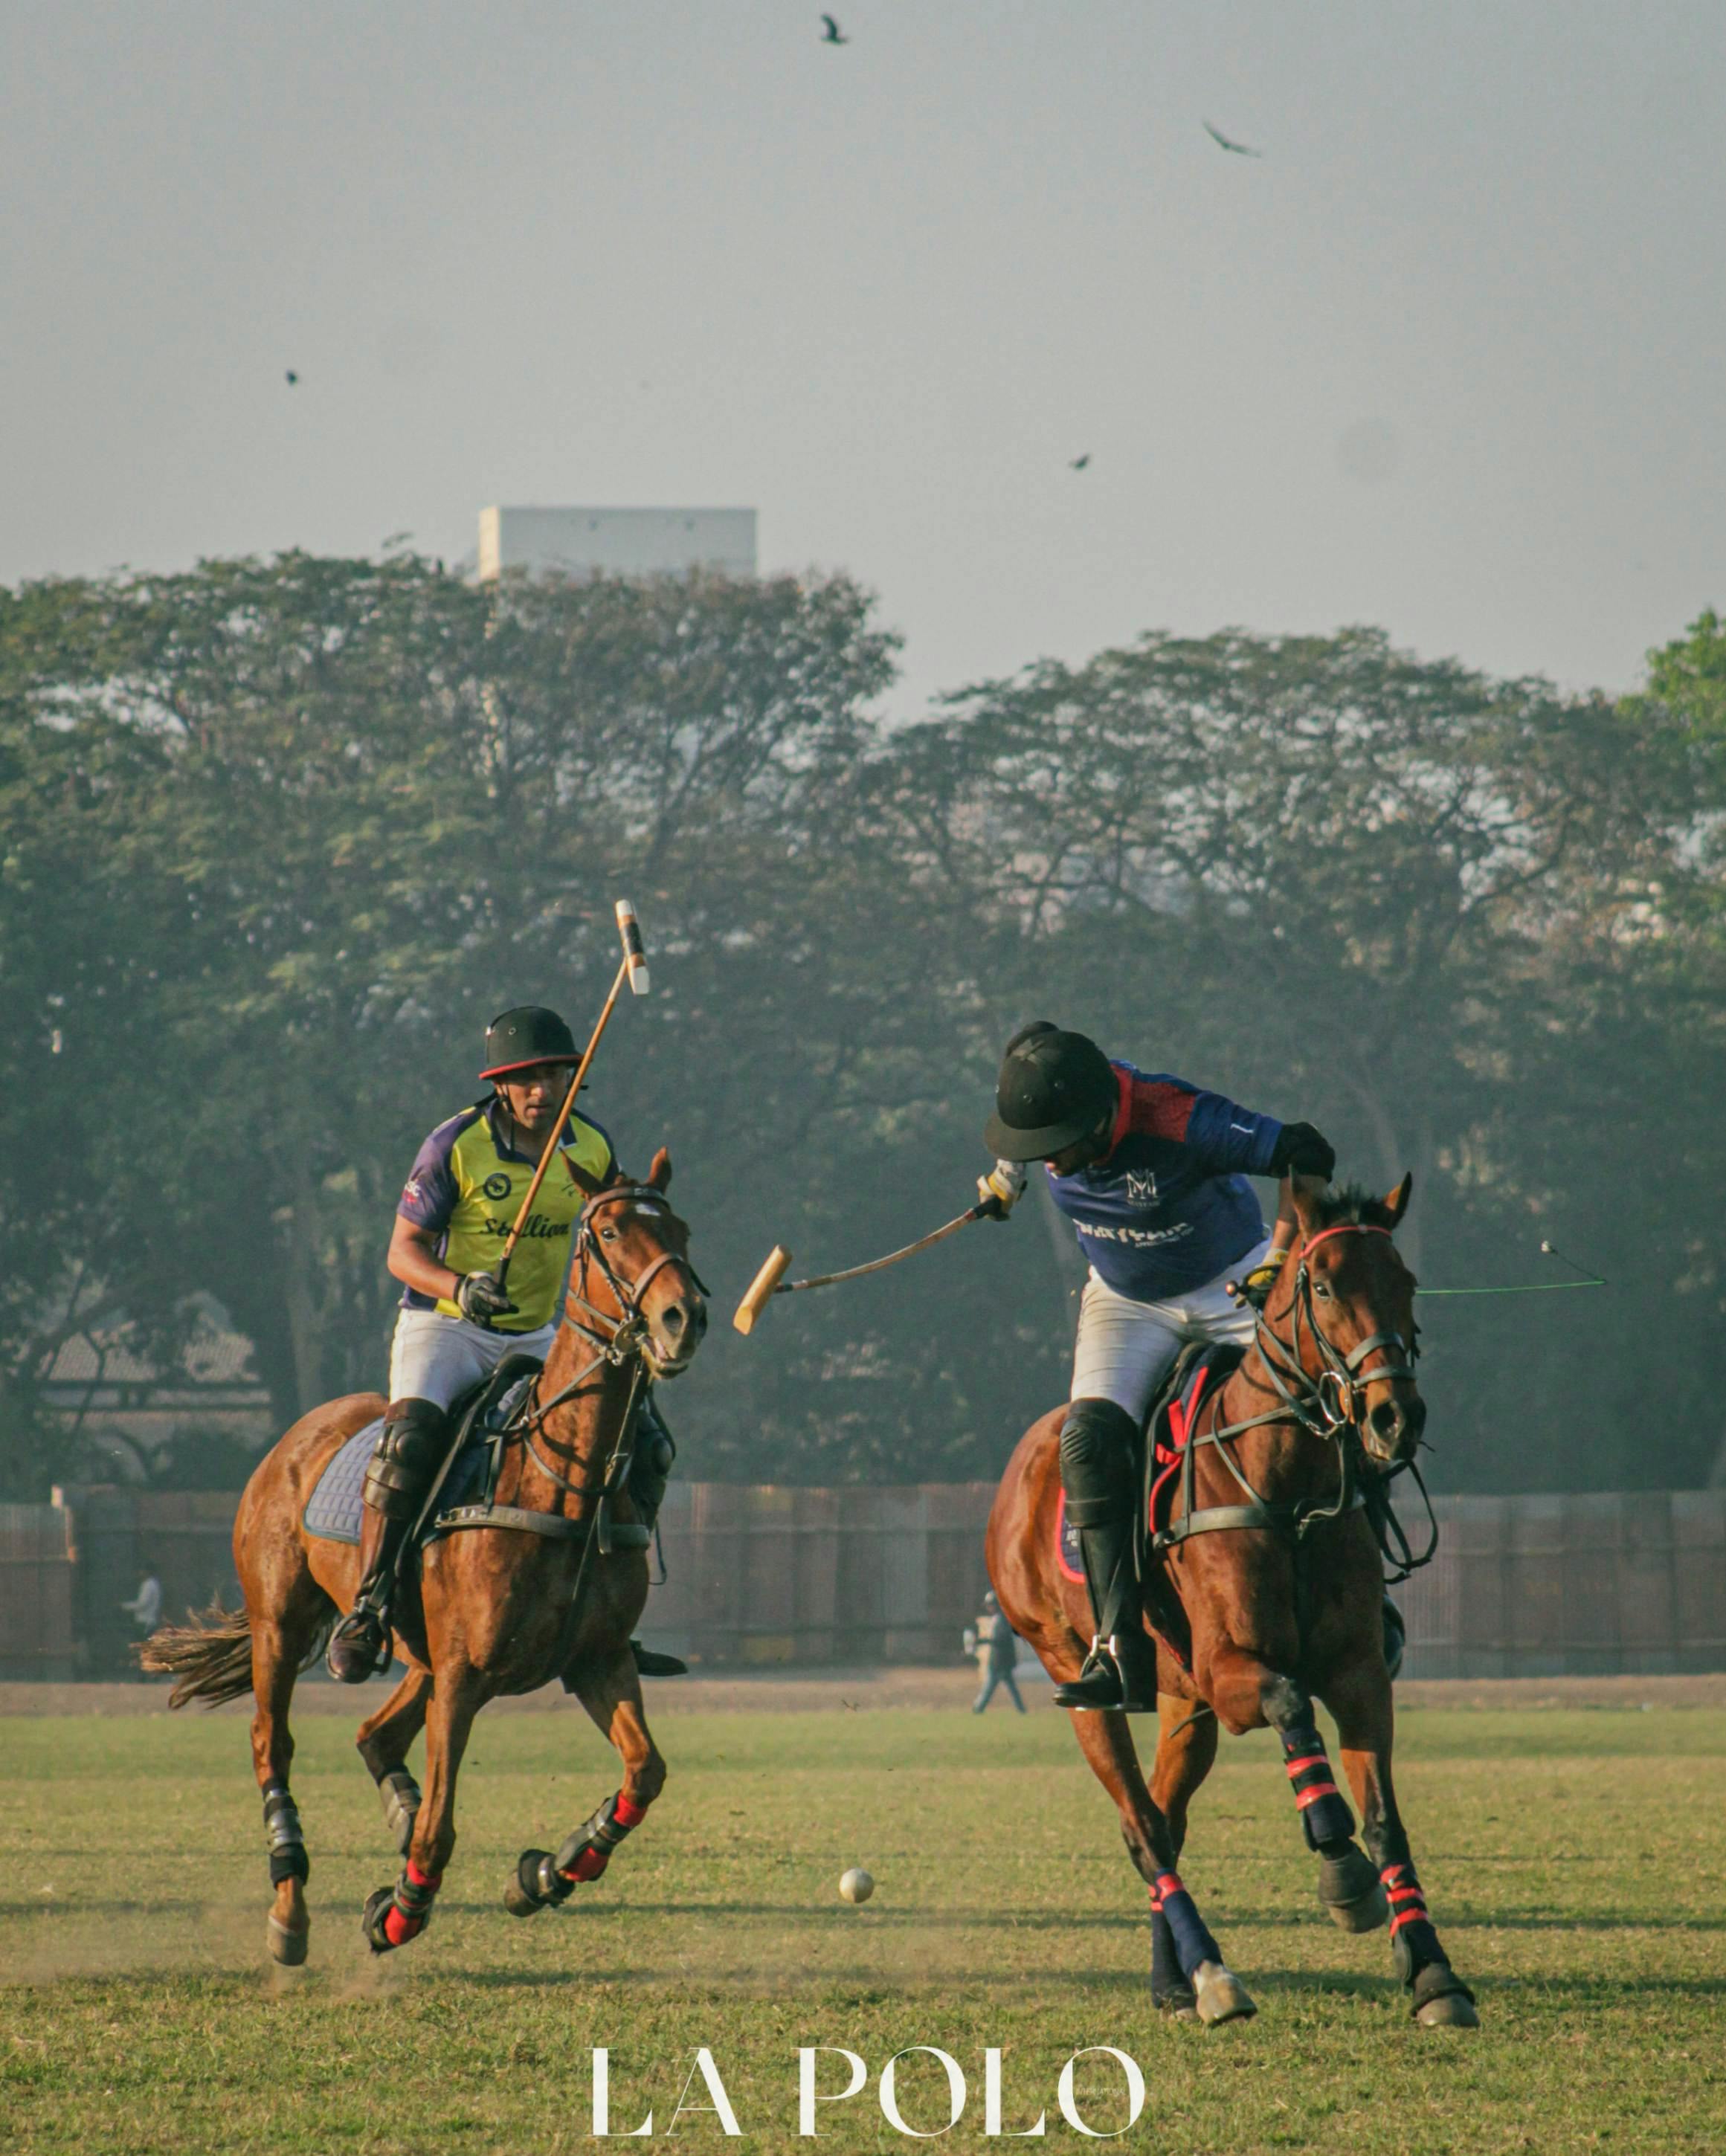 The skill and precision required to play polo at this level is impressive.